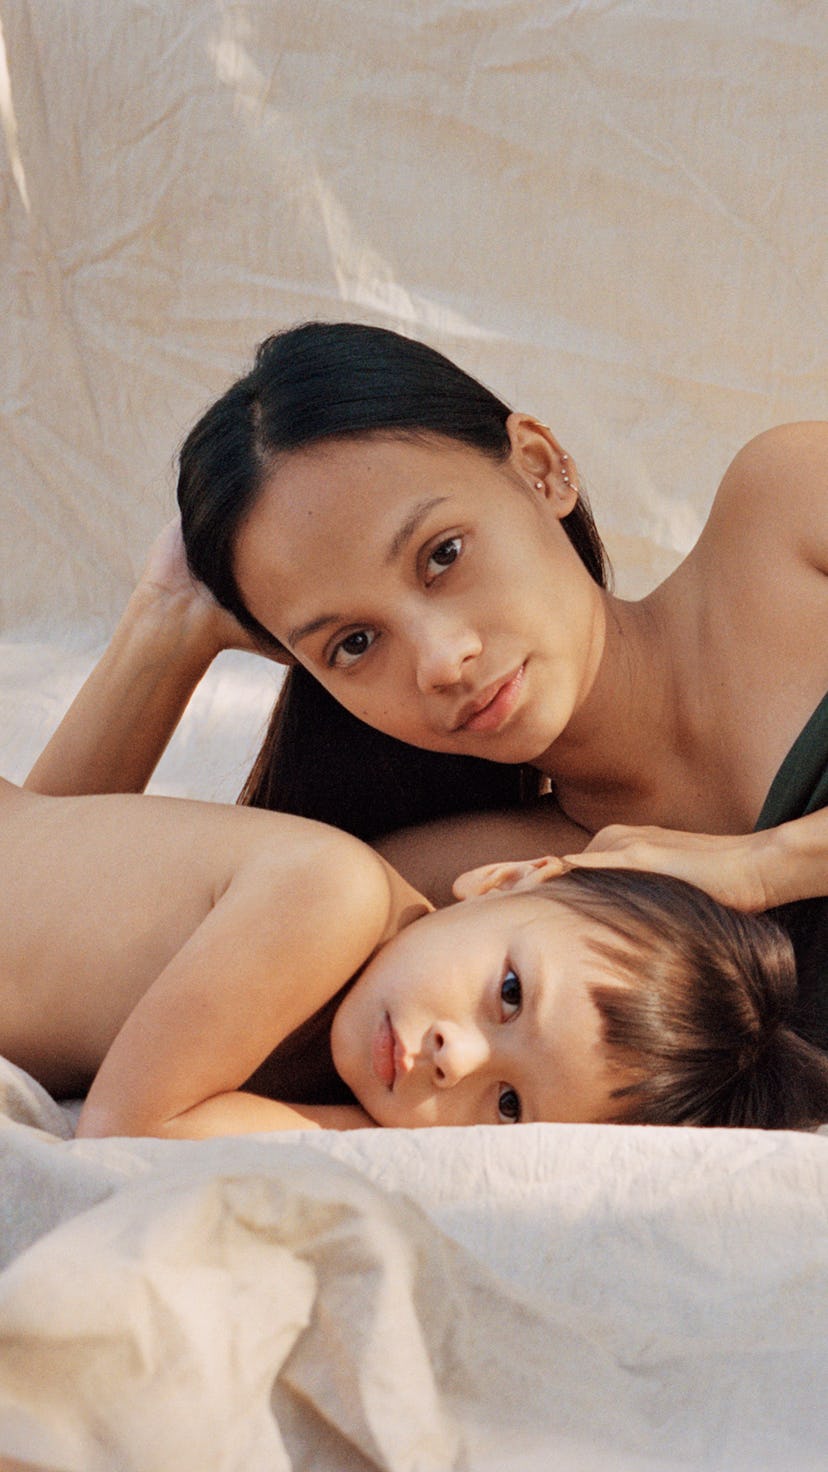 A pregnant woman lying on a bed next to her toddler both posing and looking at the camera